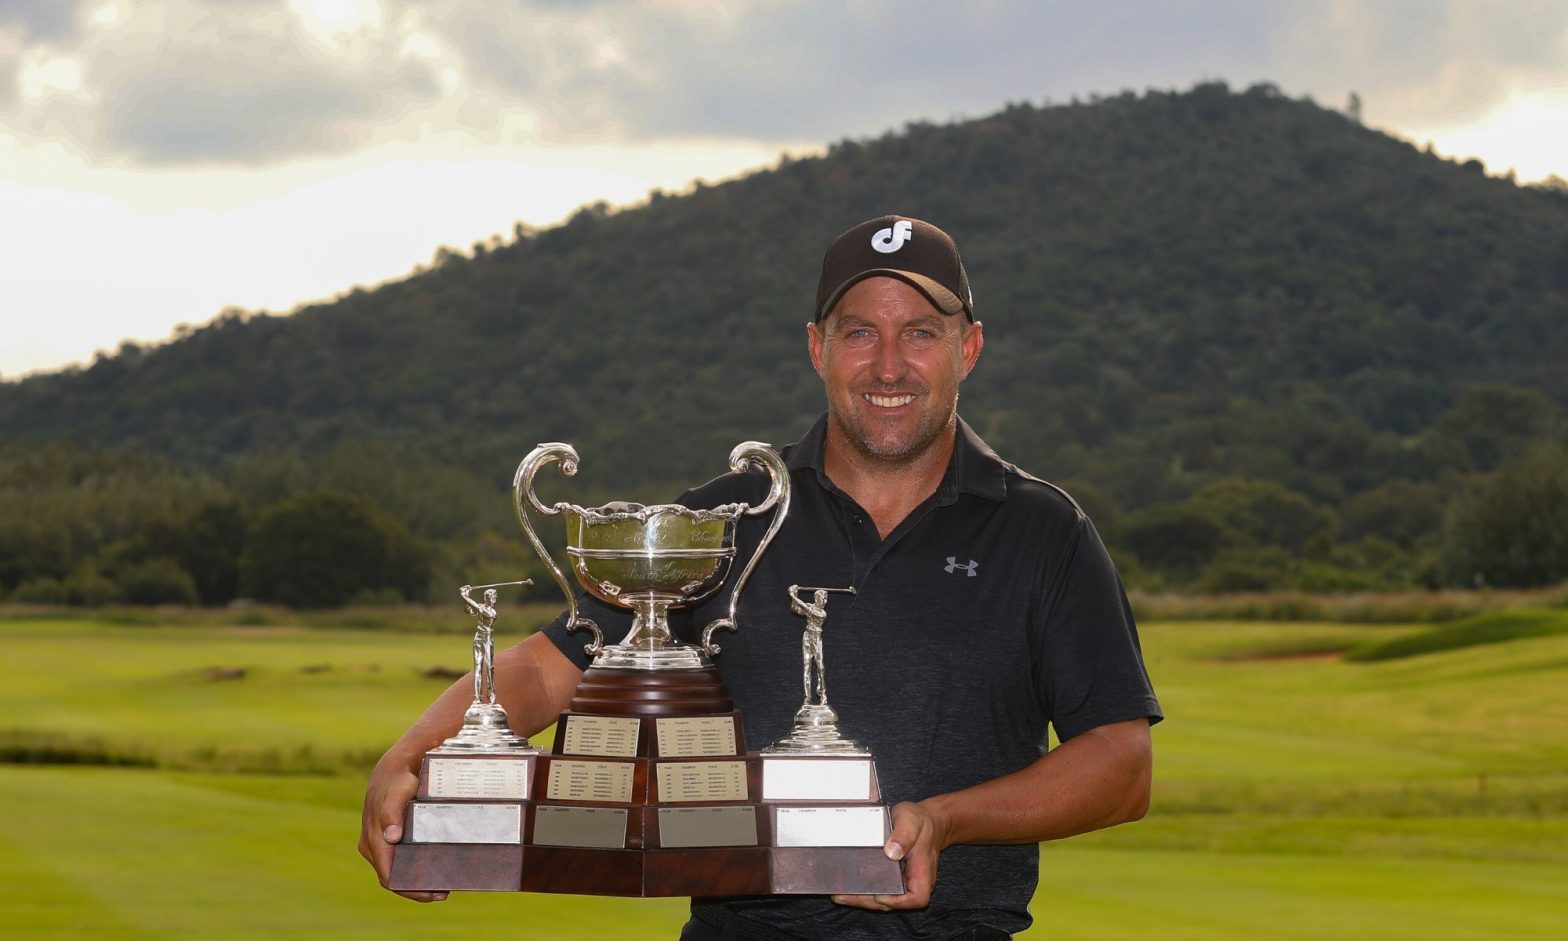 Playoff glory for Fichardt in Eye of Africa PGA Championship